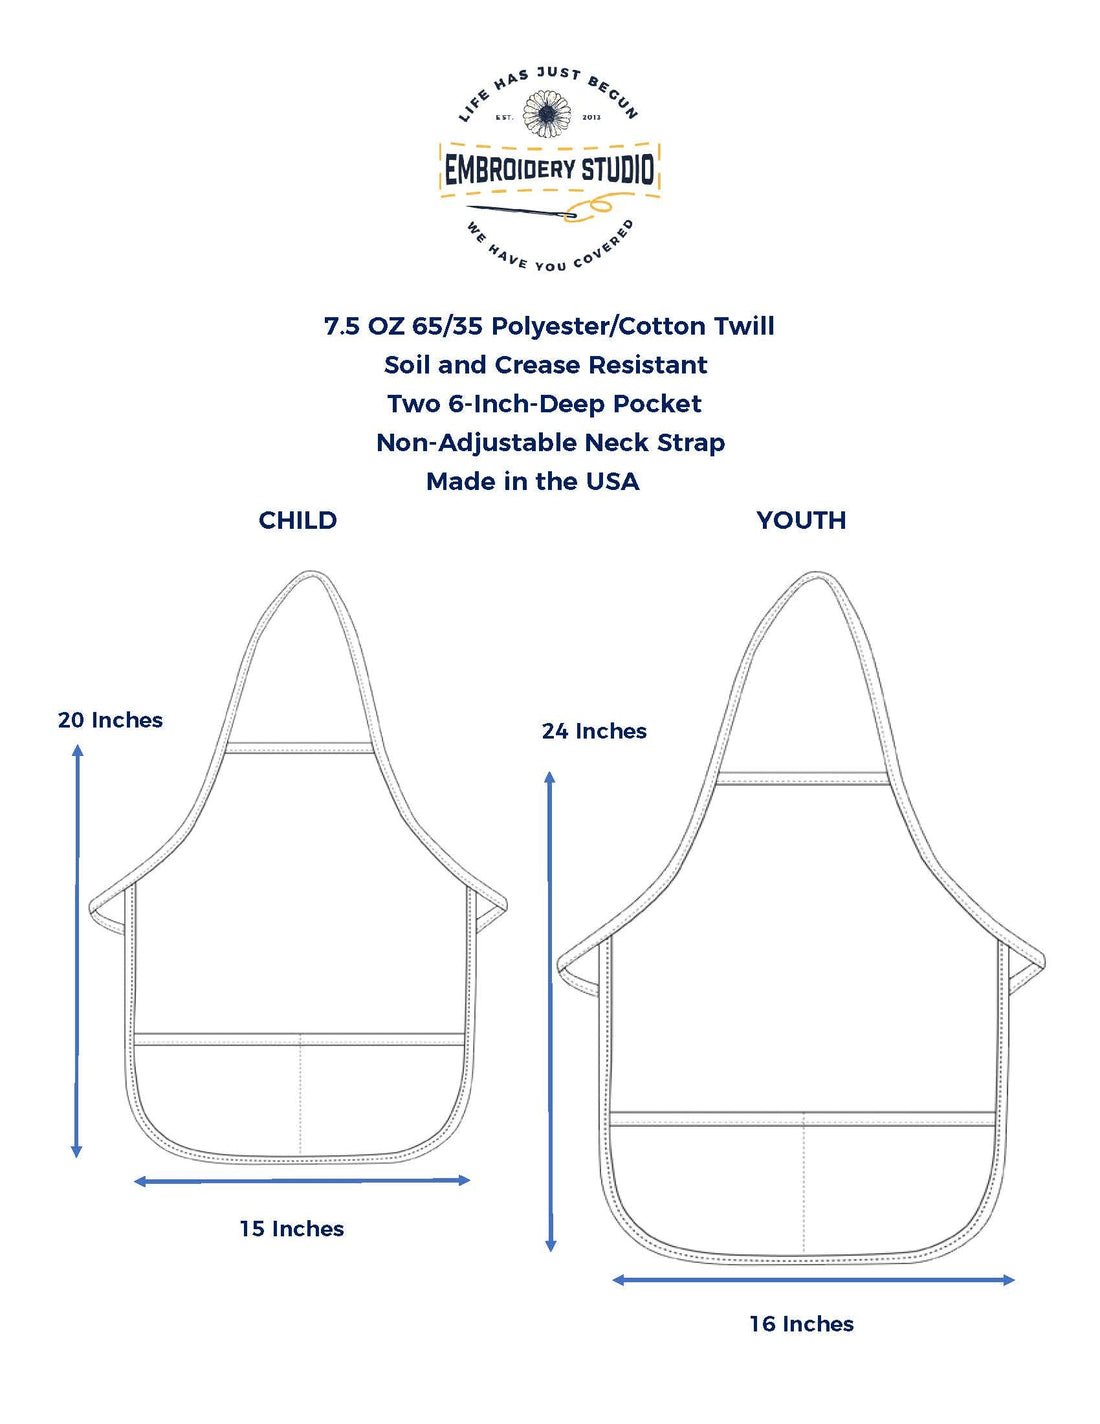 Child and Youth apron dimensions and features. - Life Has Just Begun